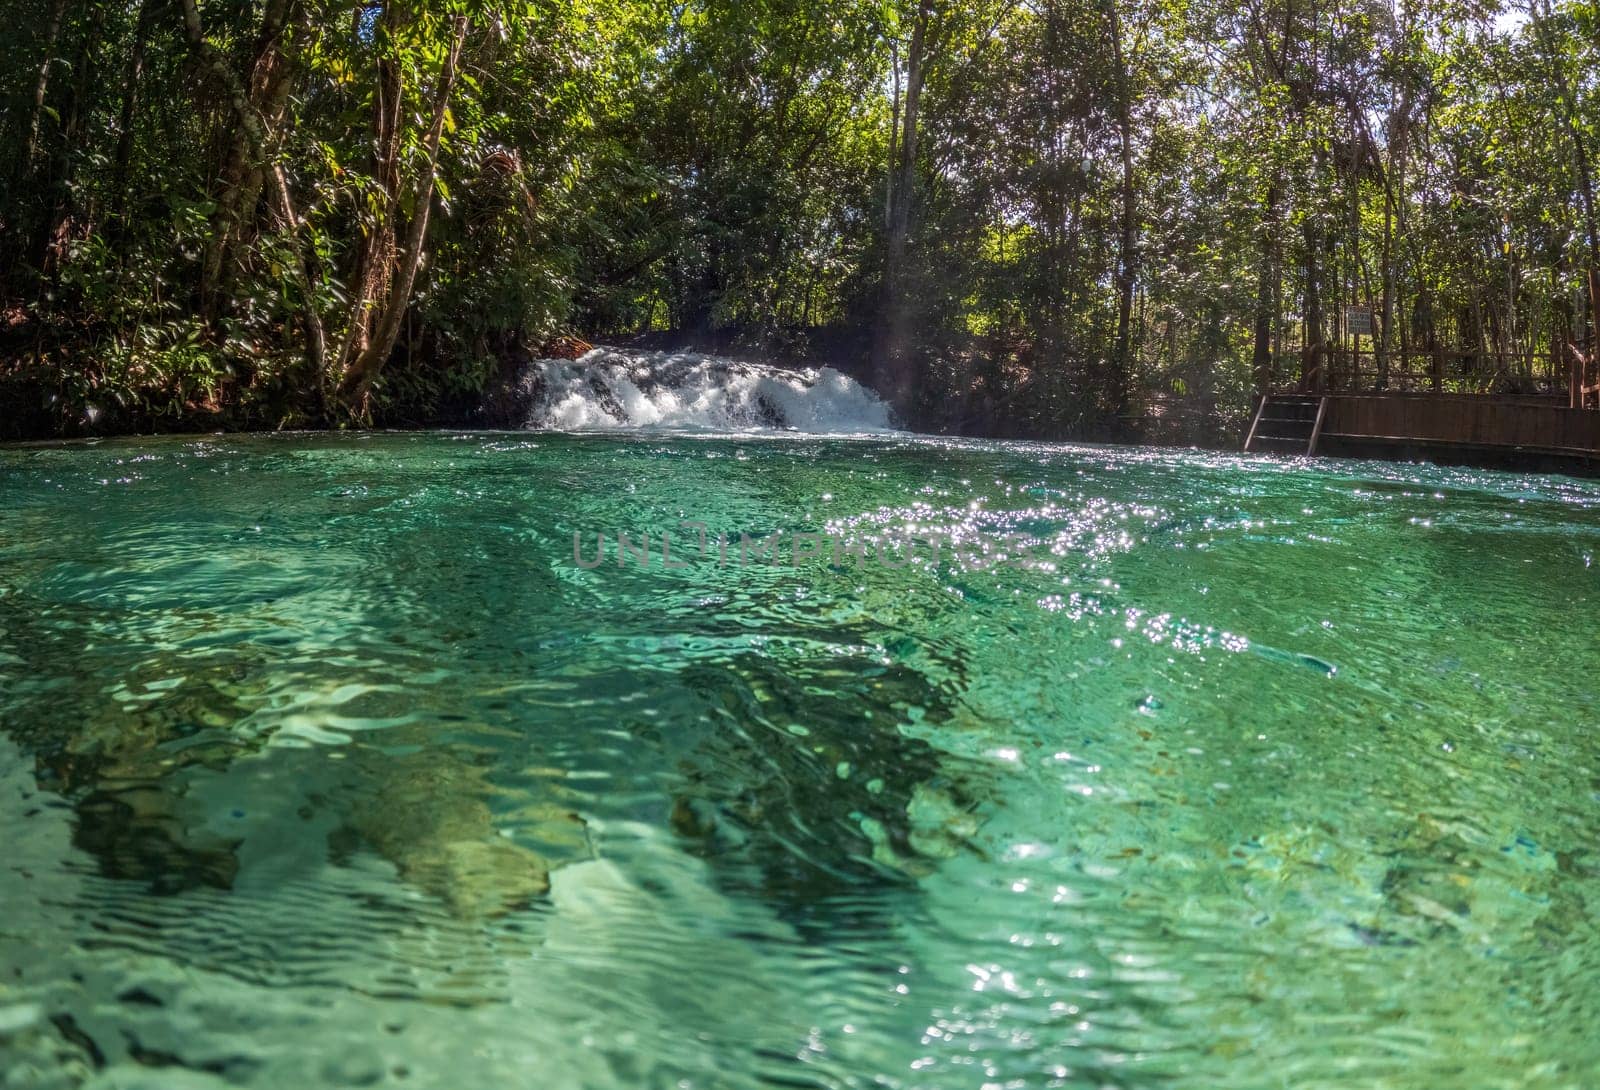 Experience the idyllic beauty of Cachoeira de Formiga, the crystal clear waterfall nestled in the heart of the Brazilian jungle. Escape from the consumer culture and connect with nature in this pristine oasis.